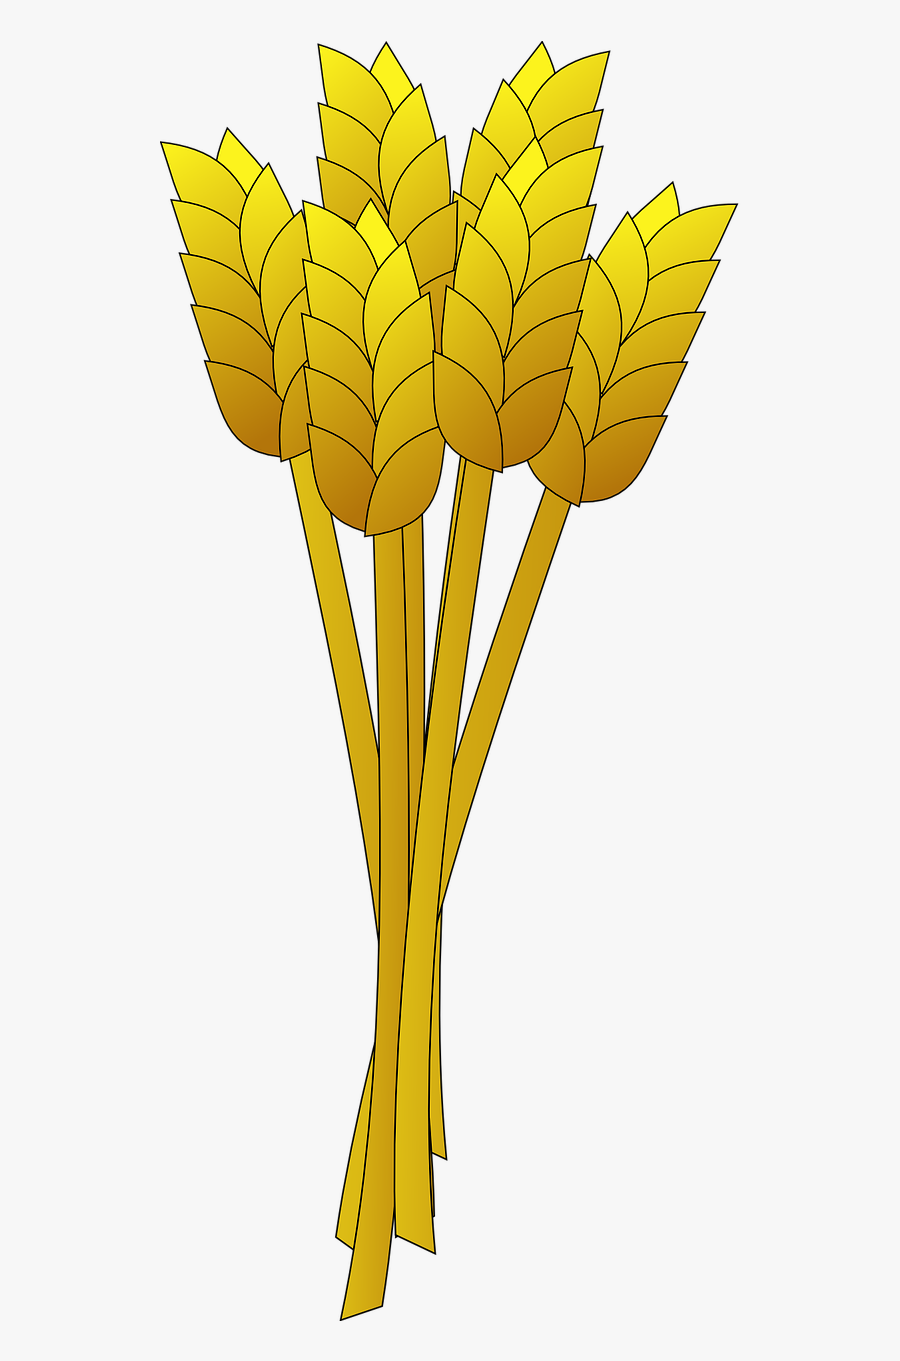 Wheat Yellow Stalk Free Picture - Animated Wheat Png, Transparent Clipart